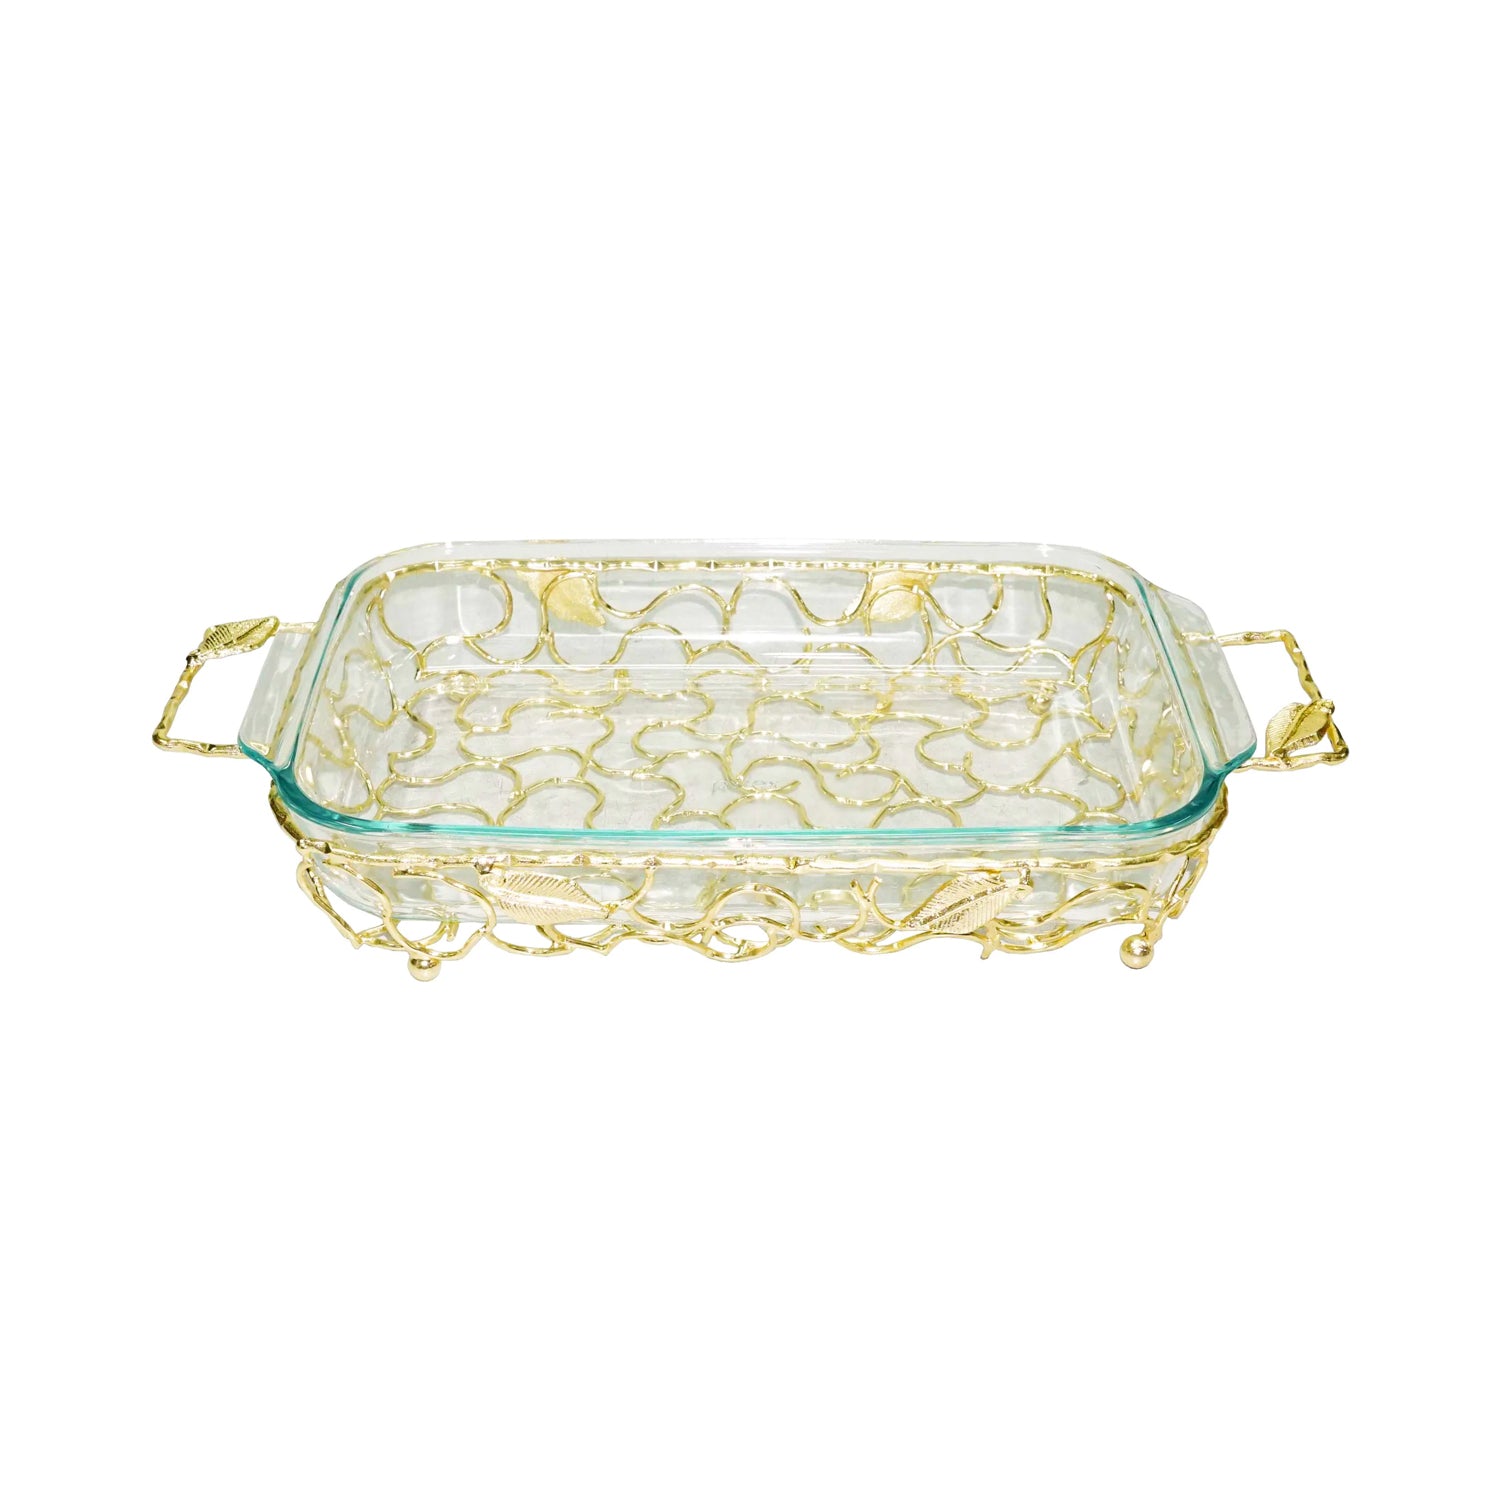 9x13 aluminum pan holder with gold twisted handles – Trendsettings